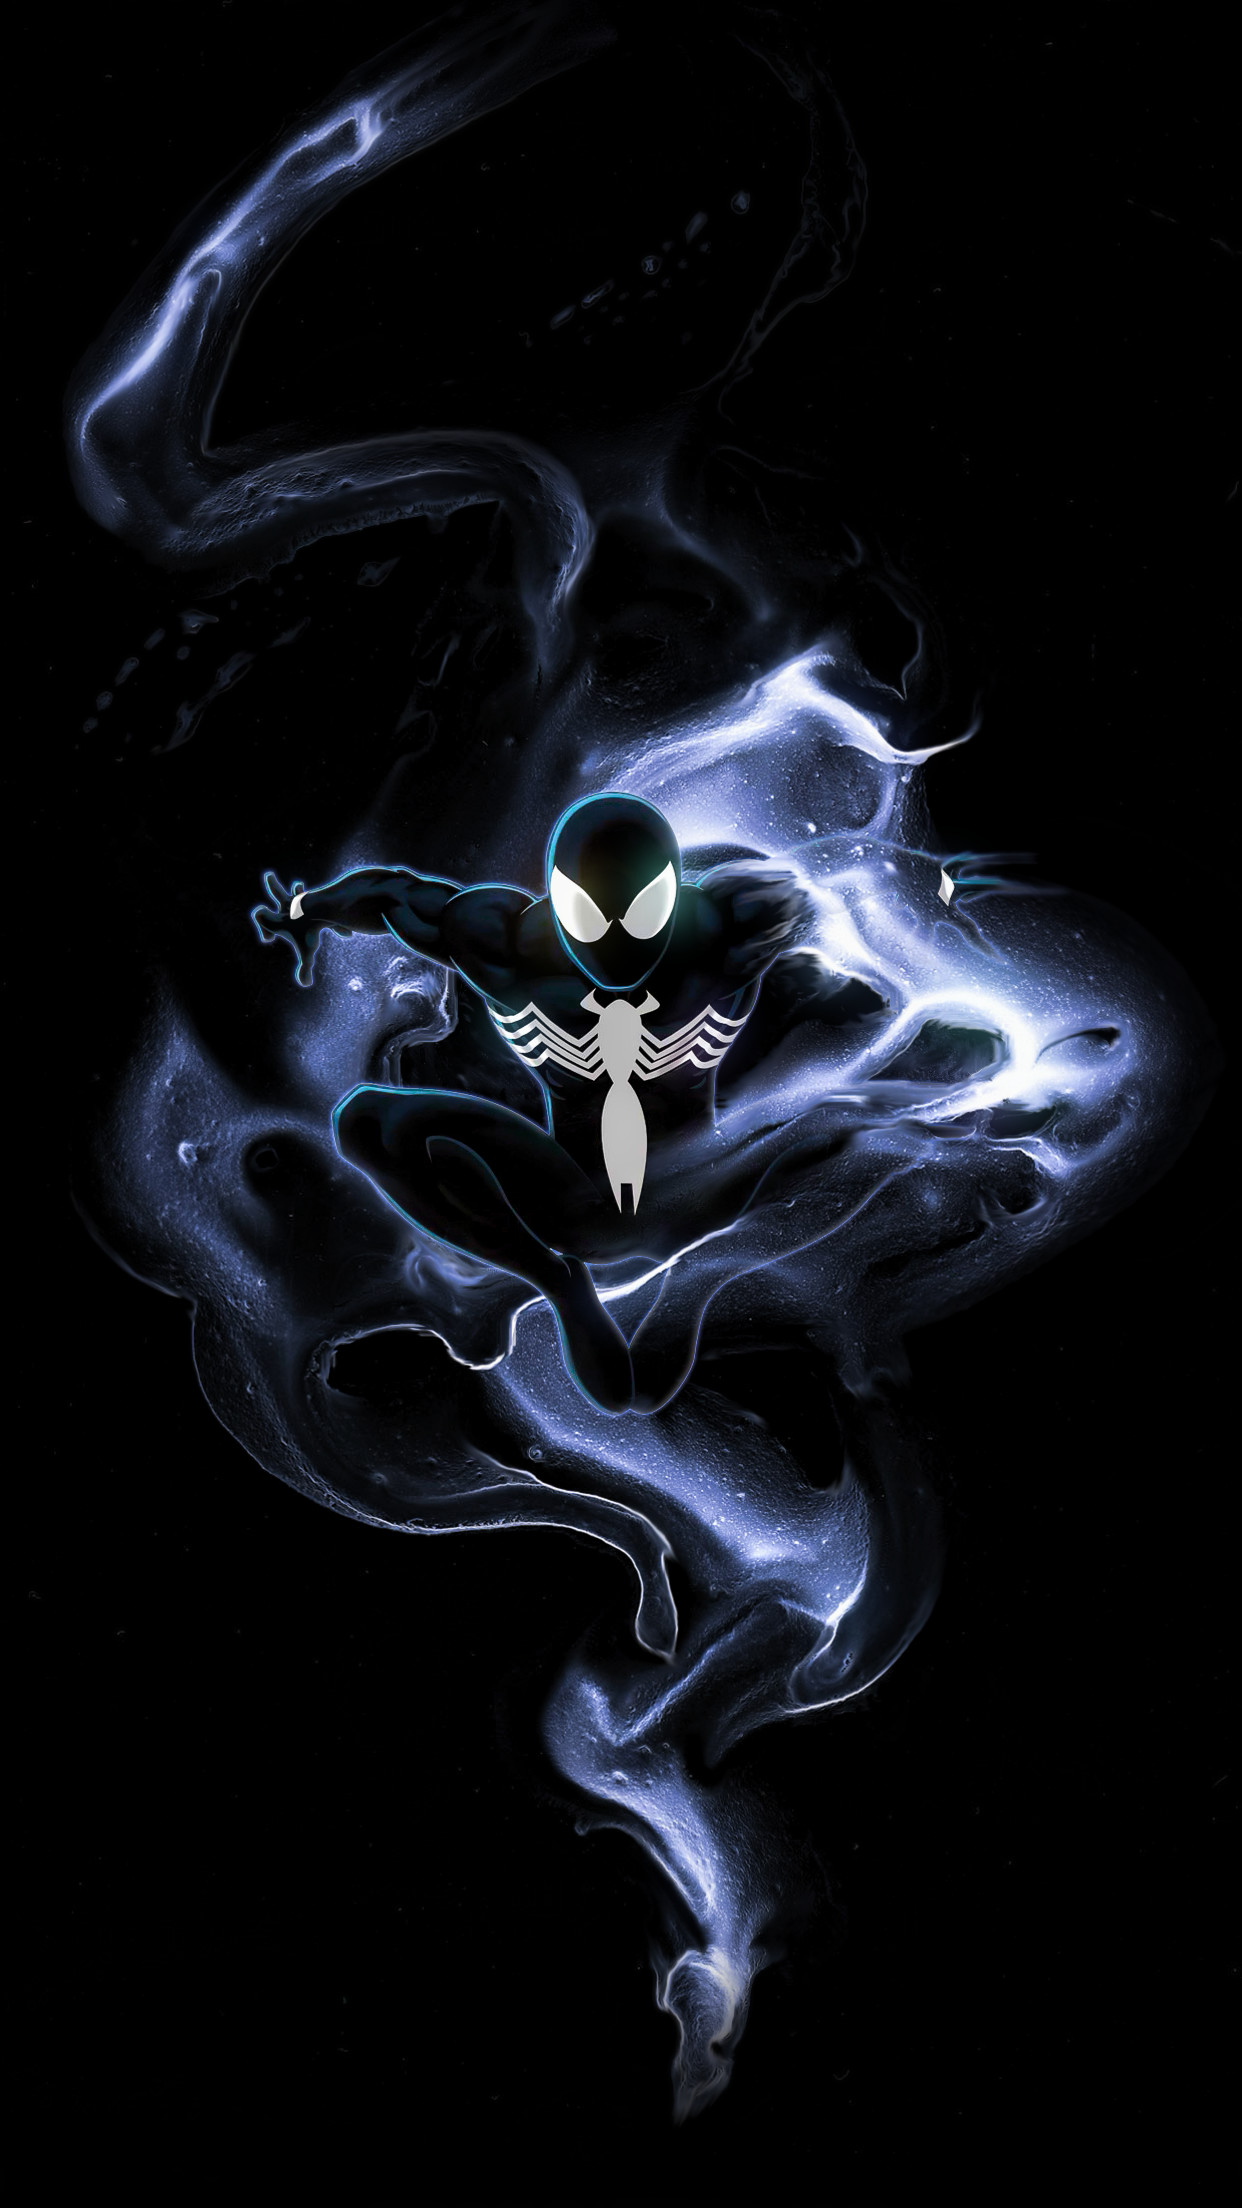 1242x2208 Symbiote Spidey - iPhone wallpaper by RadillacVIII Symbiote Spidey - iPhone  wallpaper by RadillacVIII